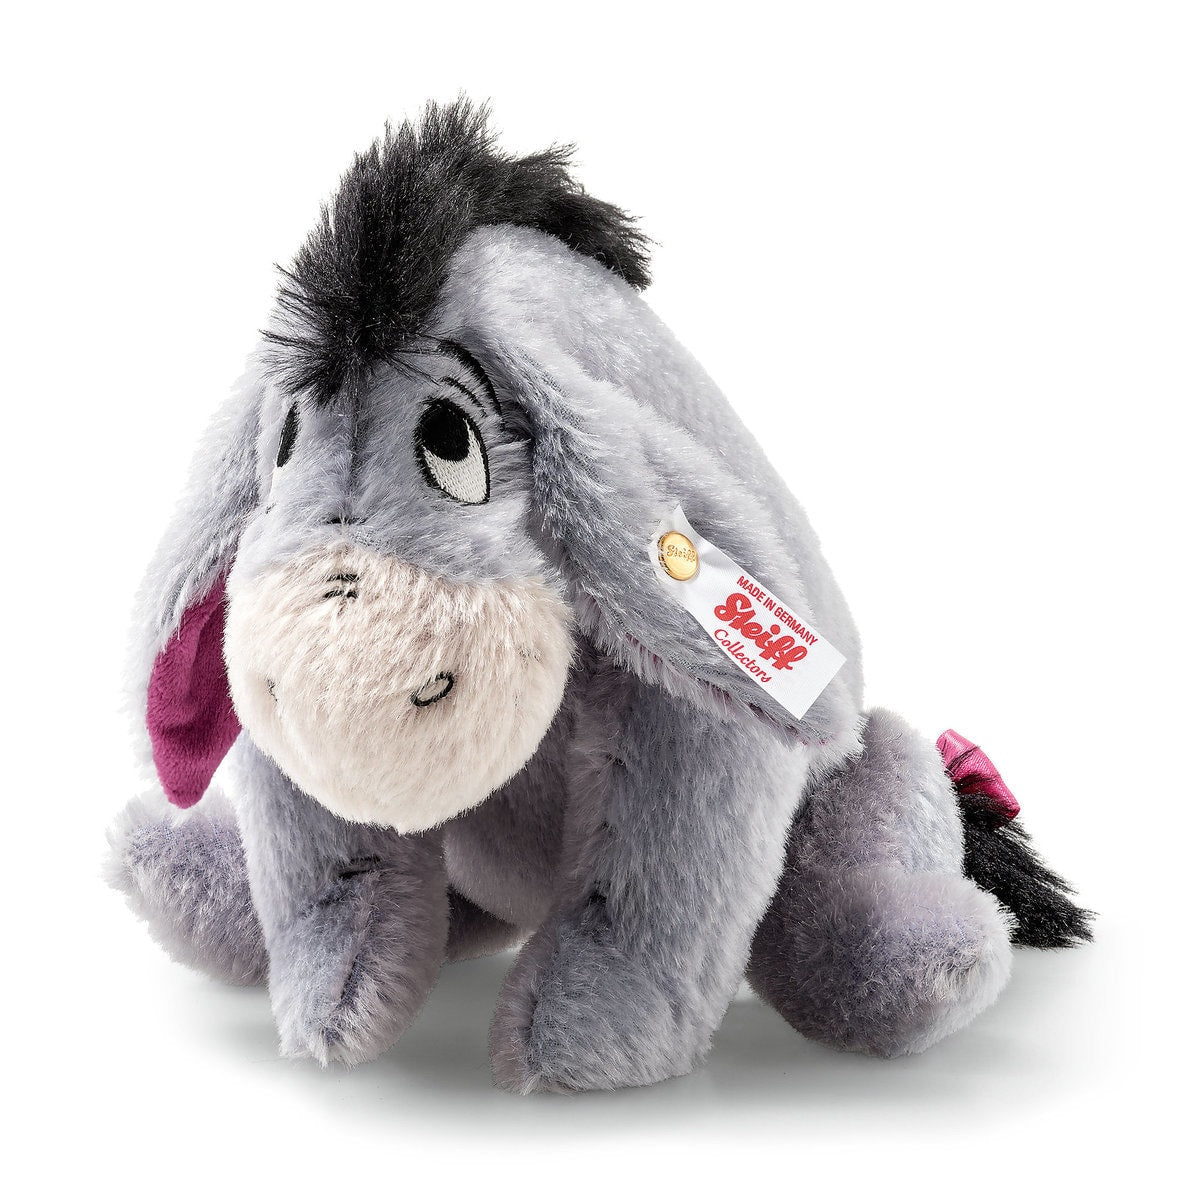 Disney Eeyore Collectible by Steiff 9 inc Limited Plush New with Tag